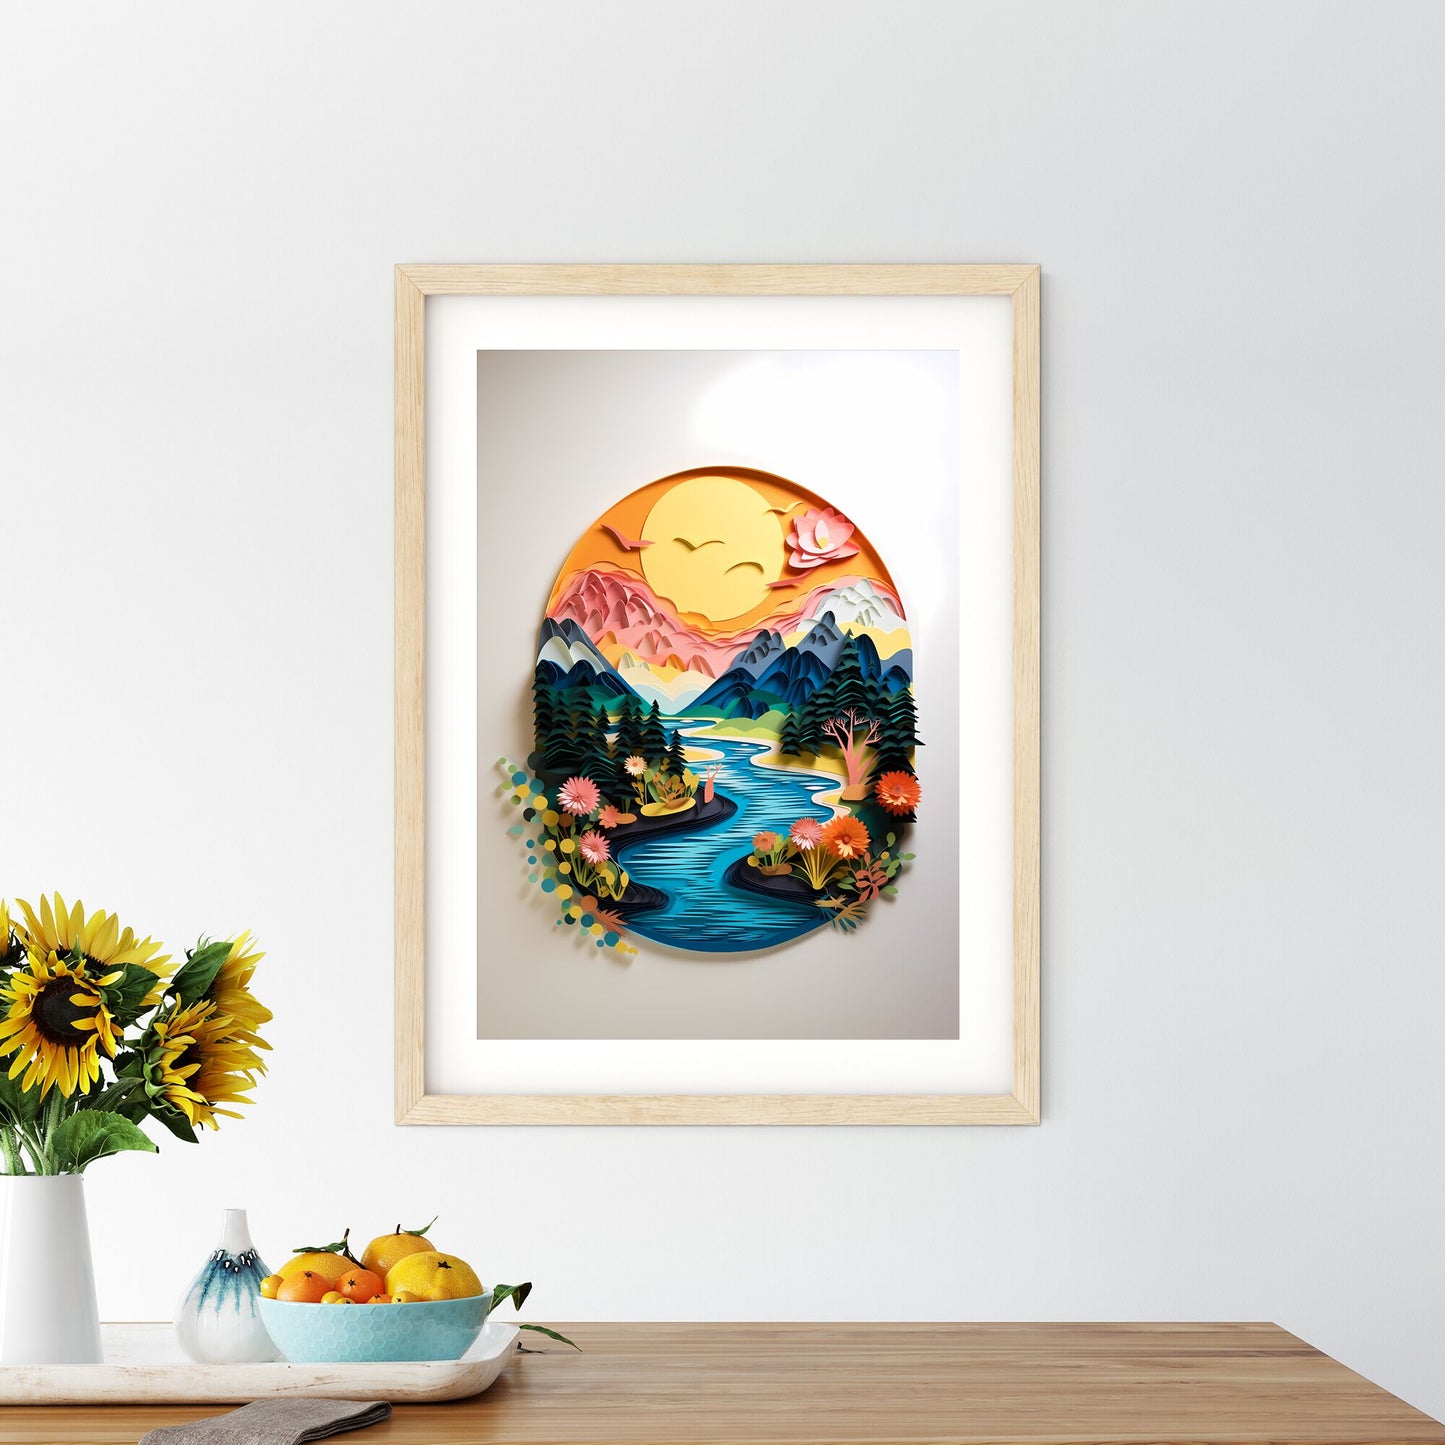 Paper Cut Out Of A River With Flowers And Mountains Art Print Default Title